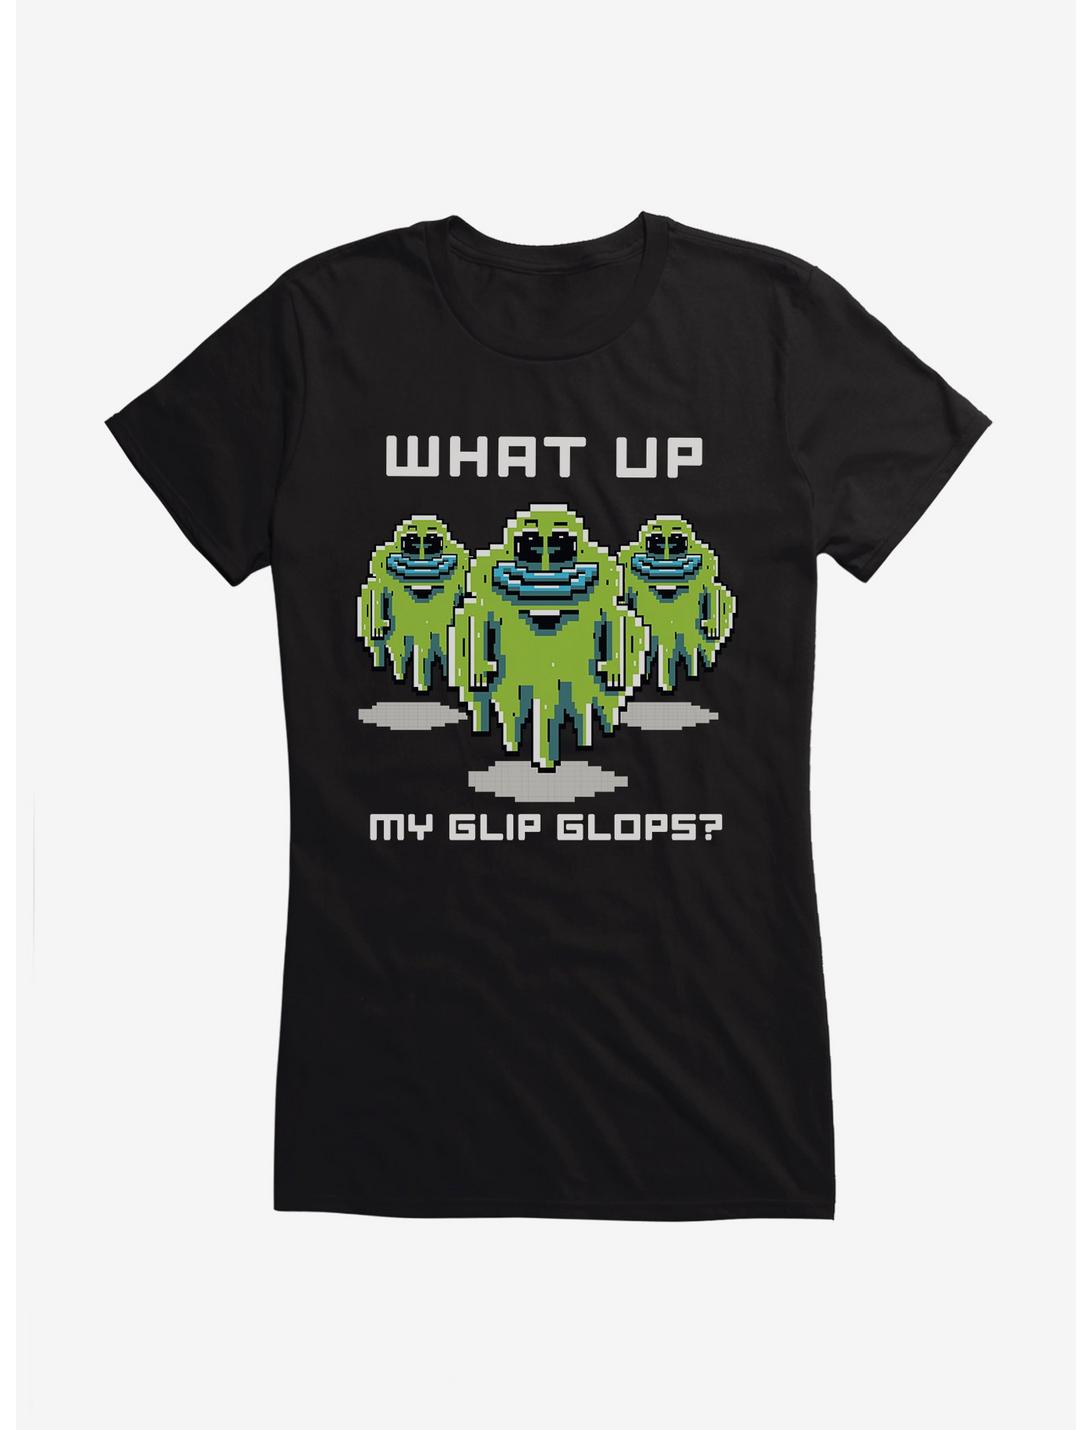 Rick And Morty What Up Blip Blops? Girls T-Shirt, , hi-res